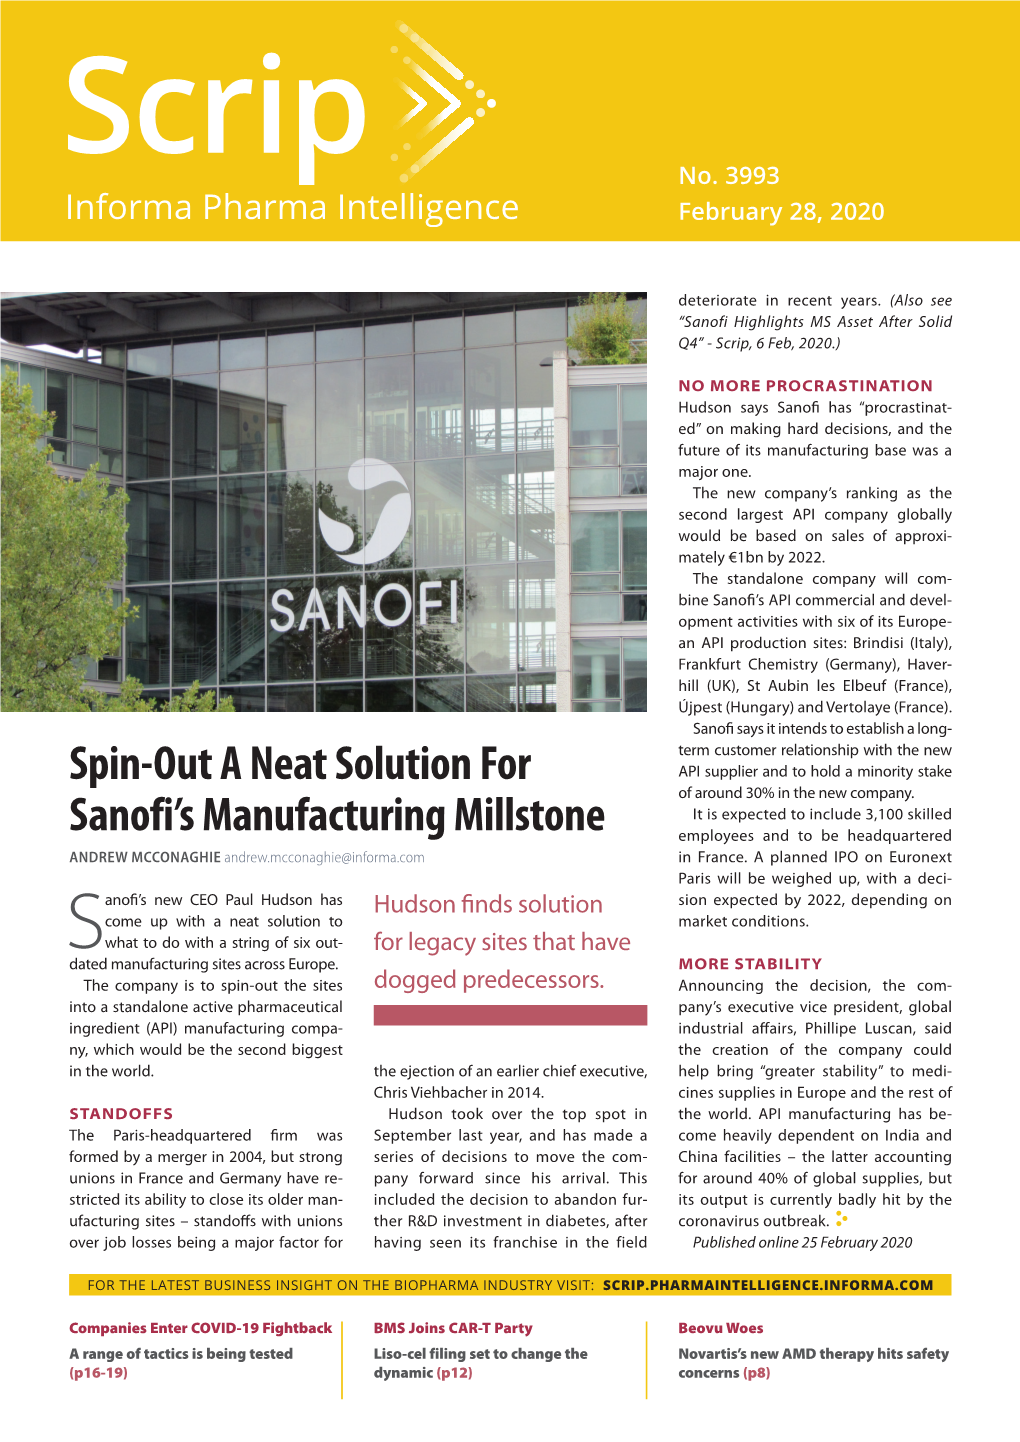 Spin-Out a Neat Solution for Sanofi's Manufacturing Millstone